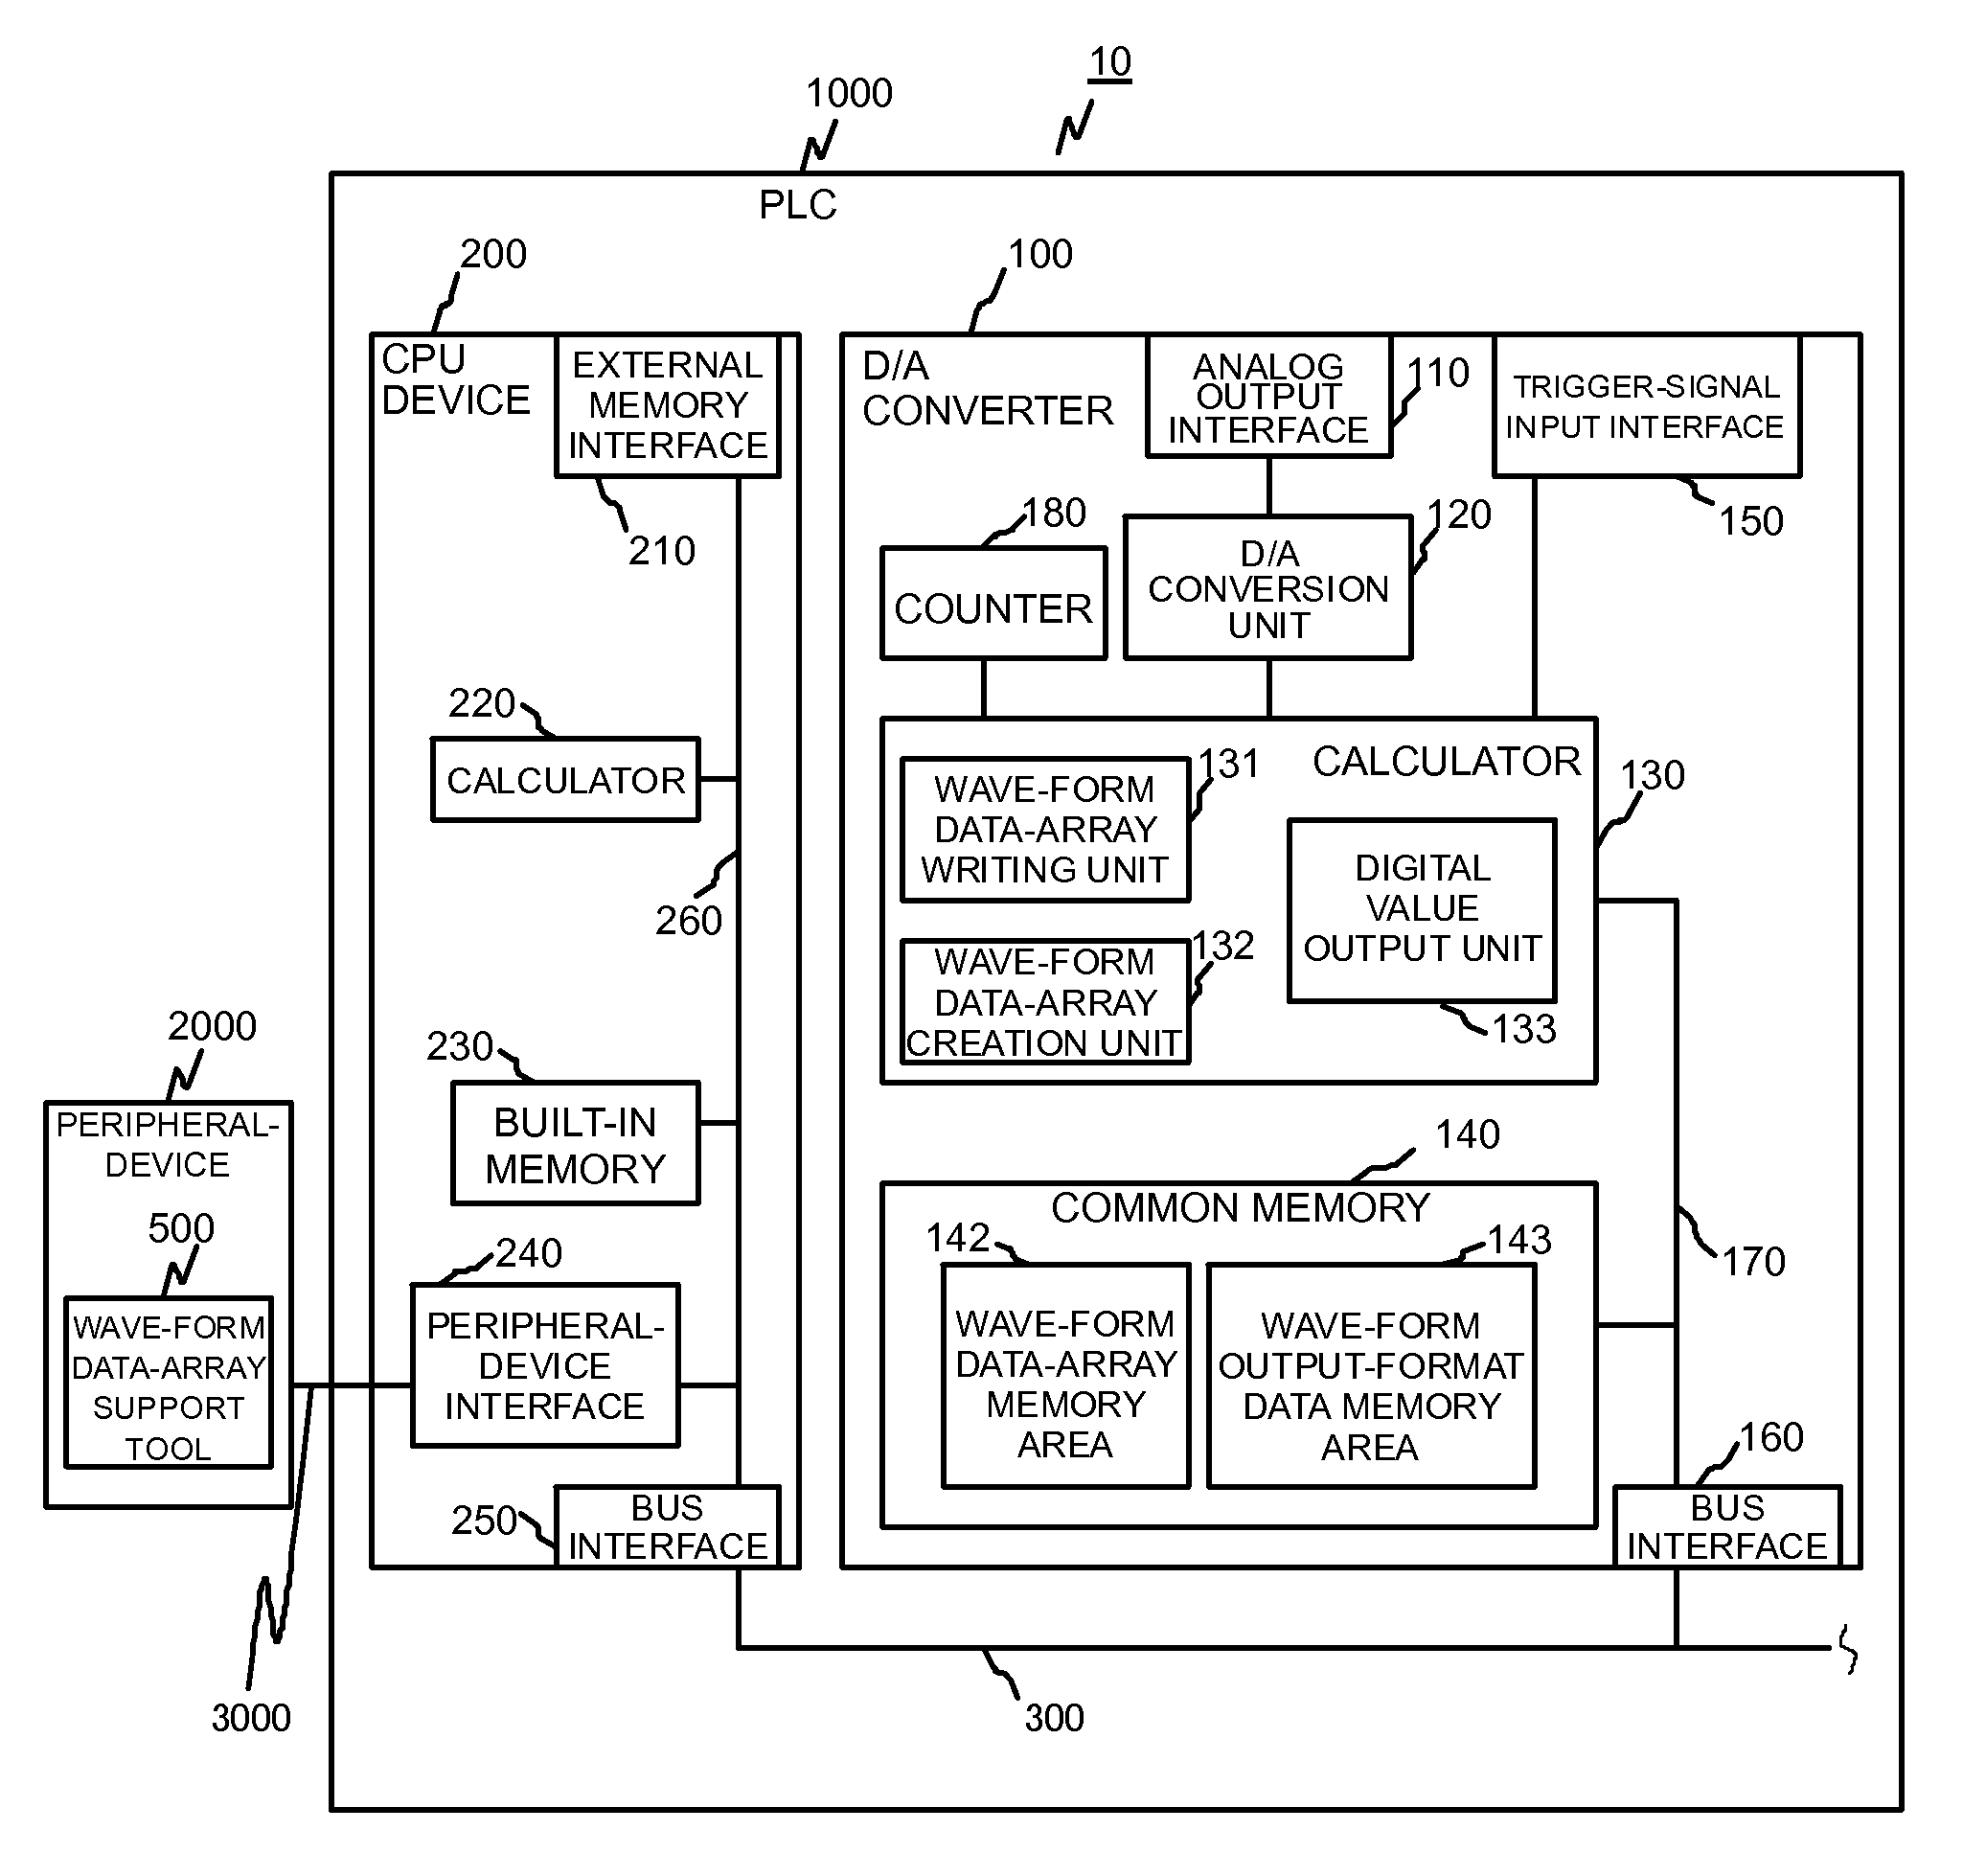 D/A converter, peripheral device, and PLC